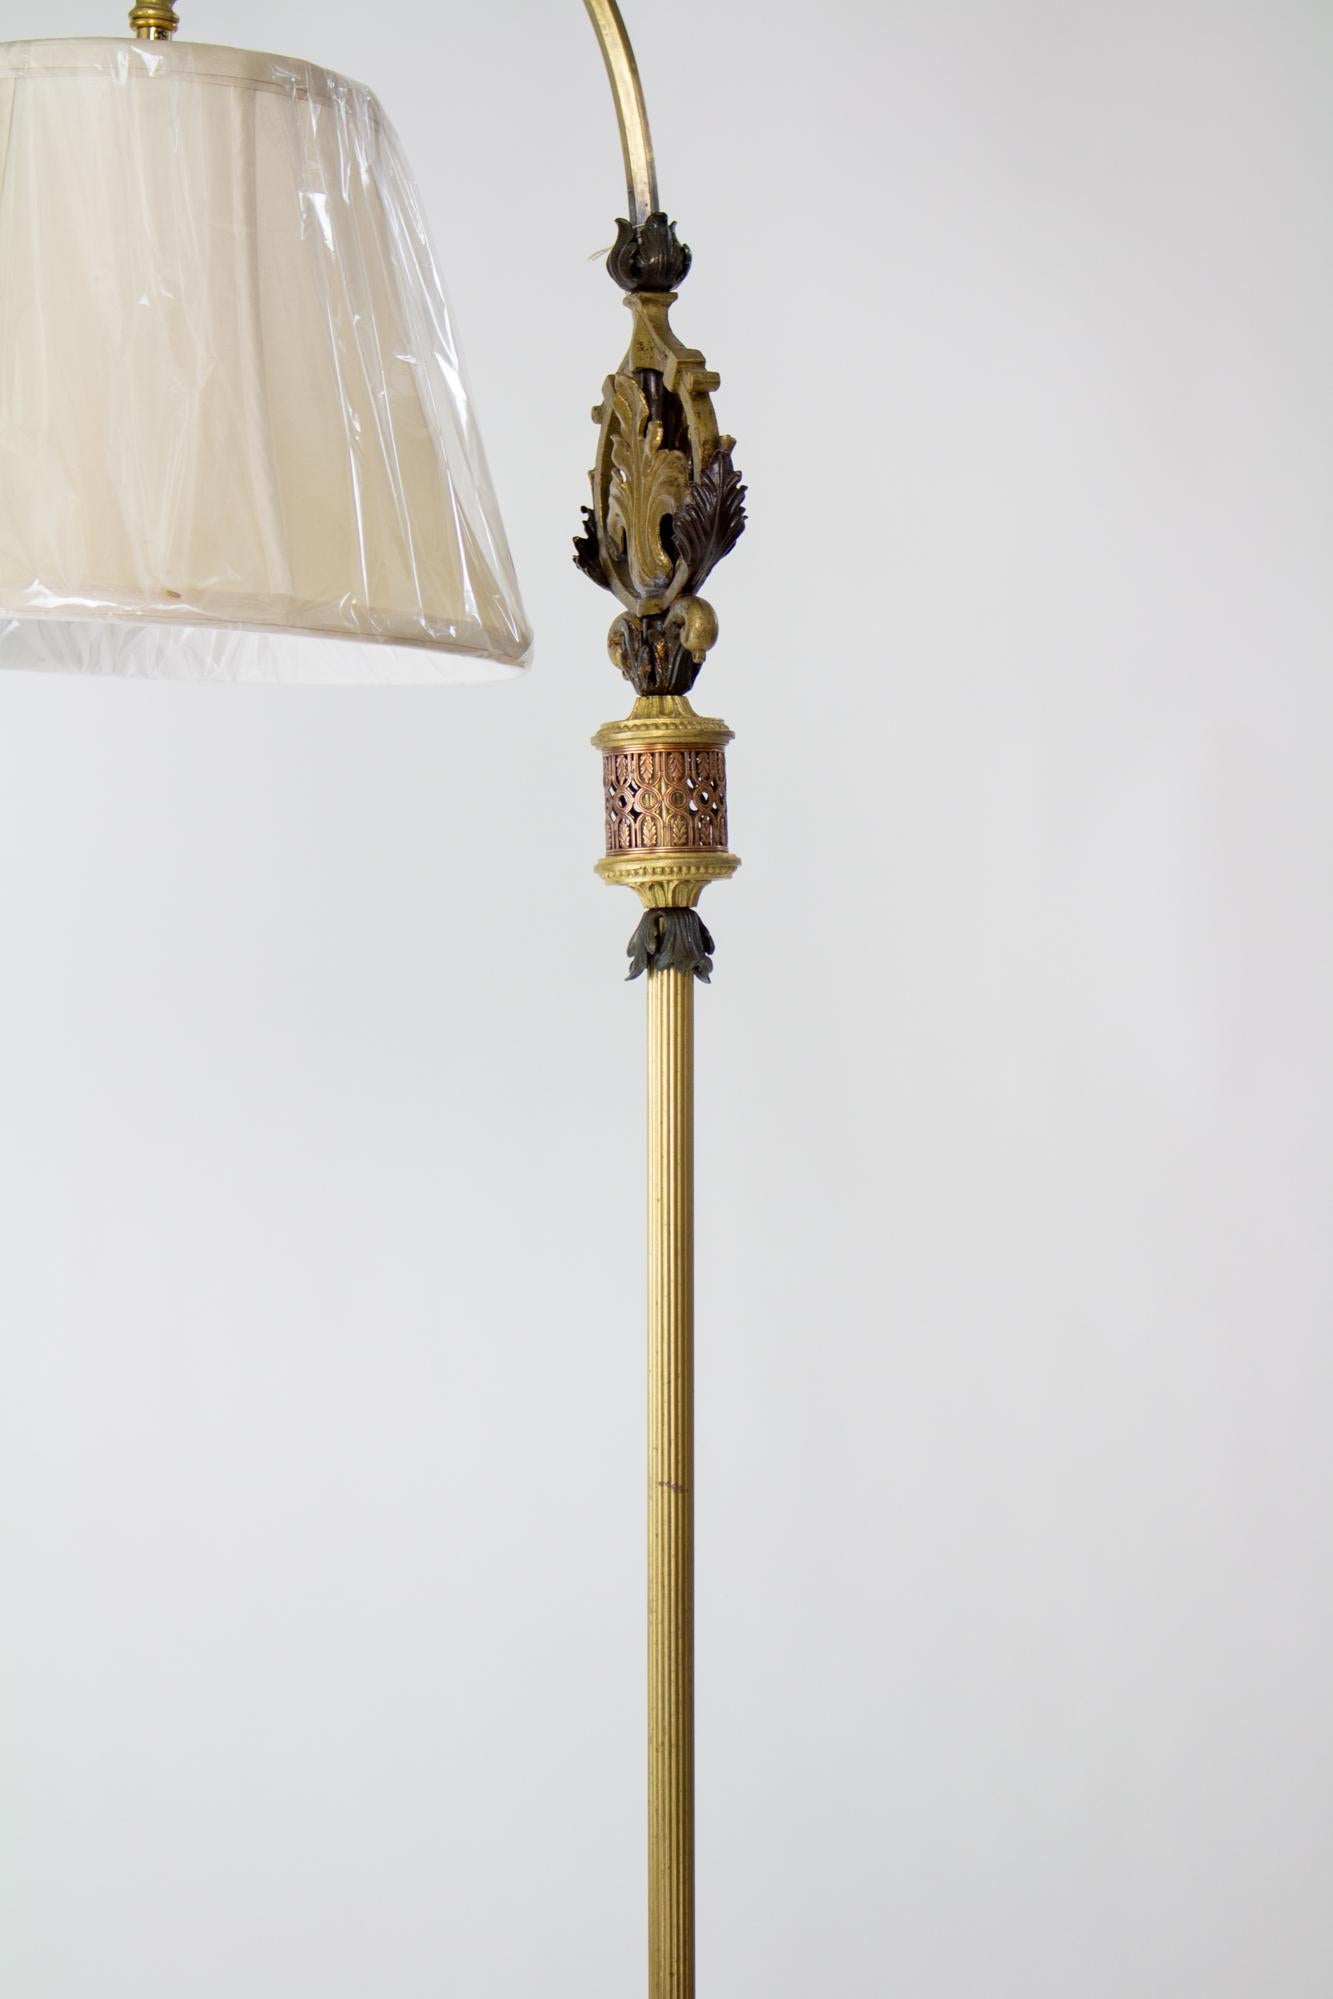 1920’s rococo revival cast iron and brass bridge lamp with shade. Ornate mix of cast iron and brass along the base and stem with foliate patterns. Curved arm holds the shade. American. The shade is new, bell shaped with a Uno fitter in a cream